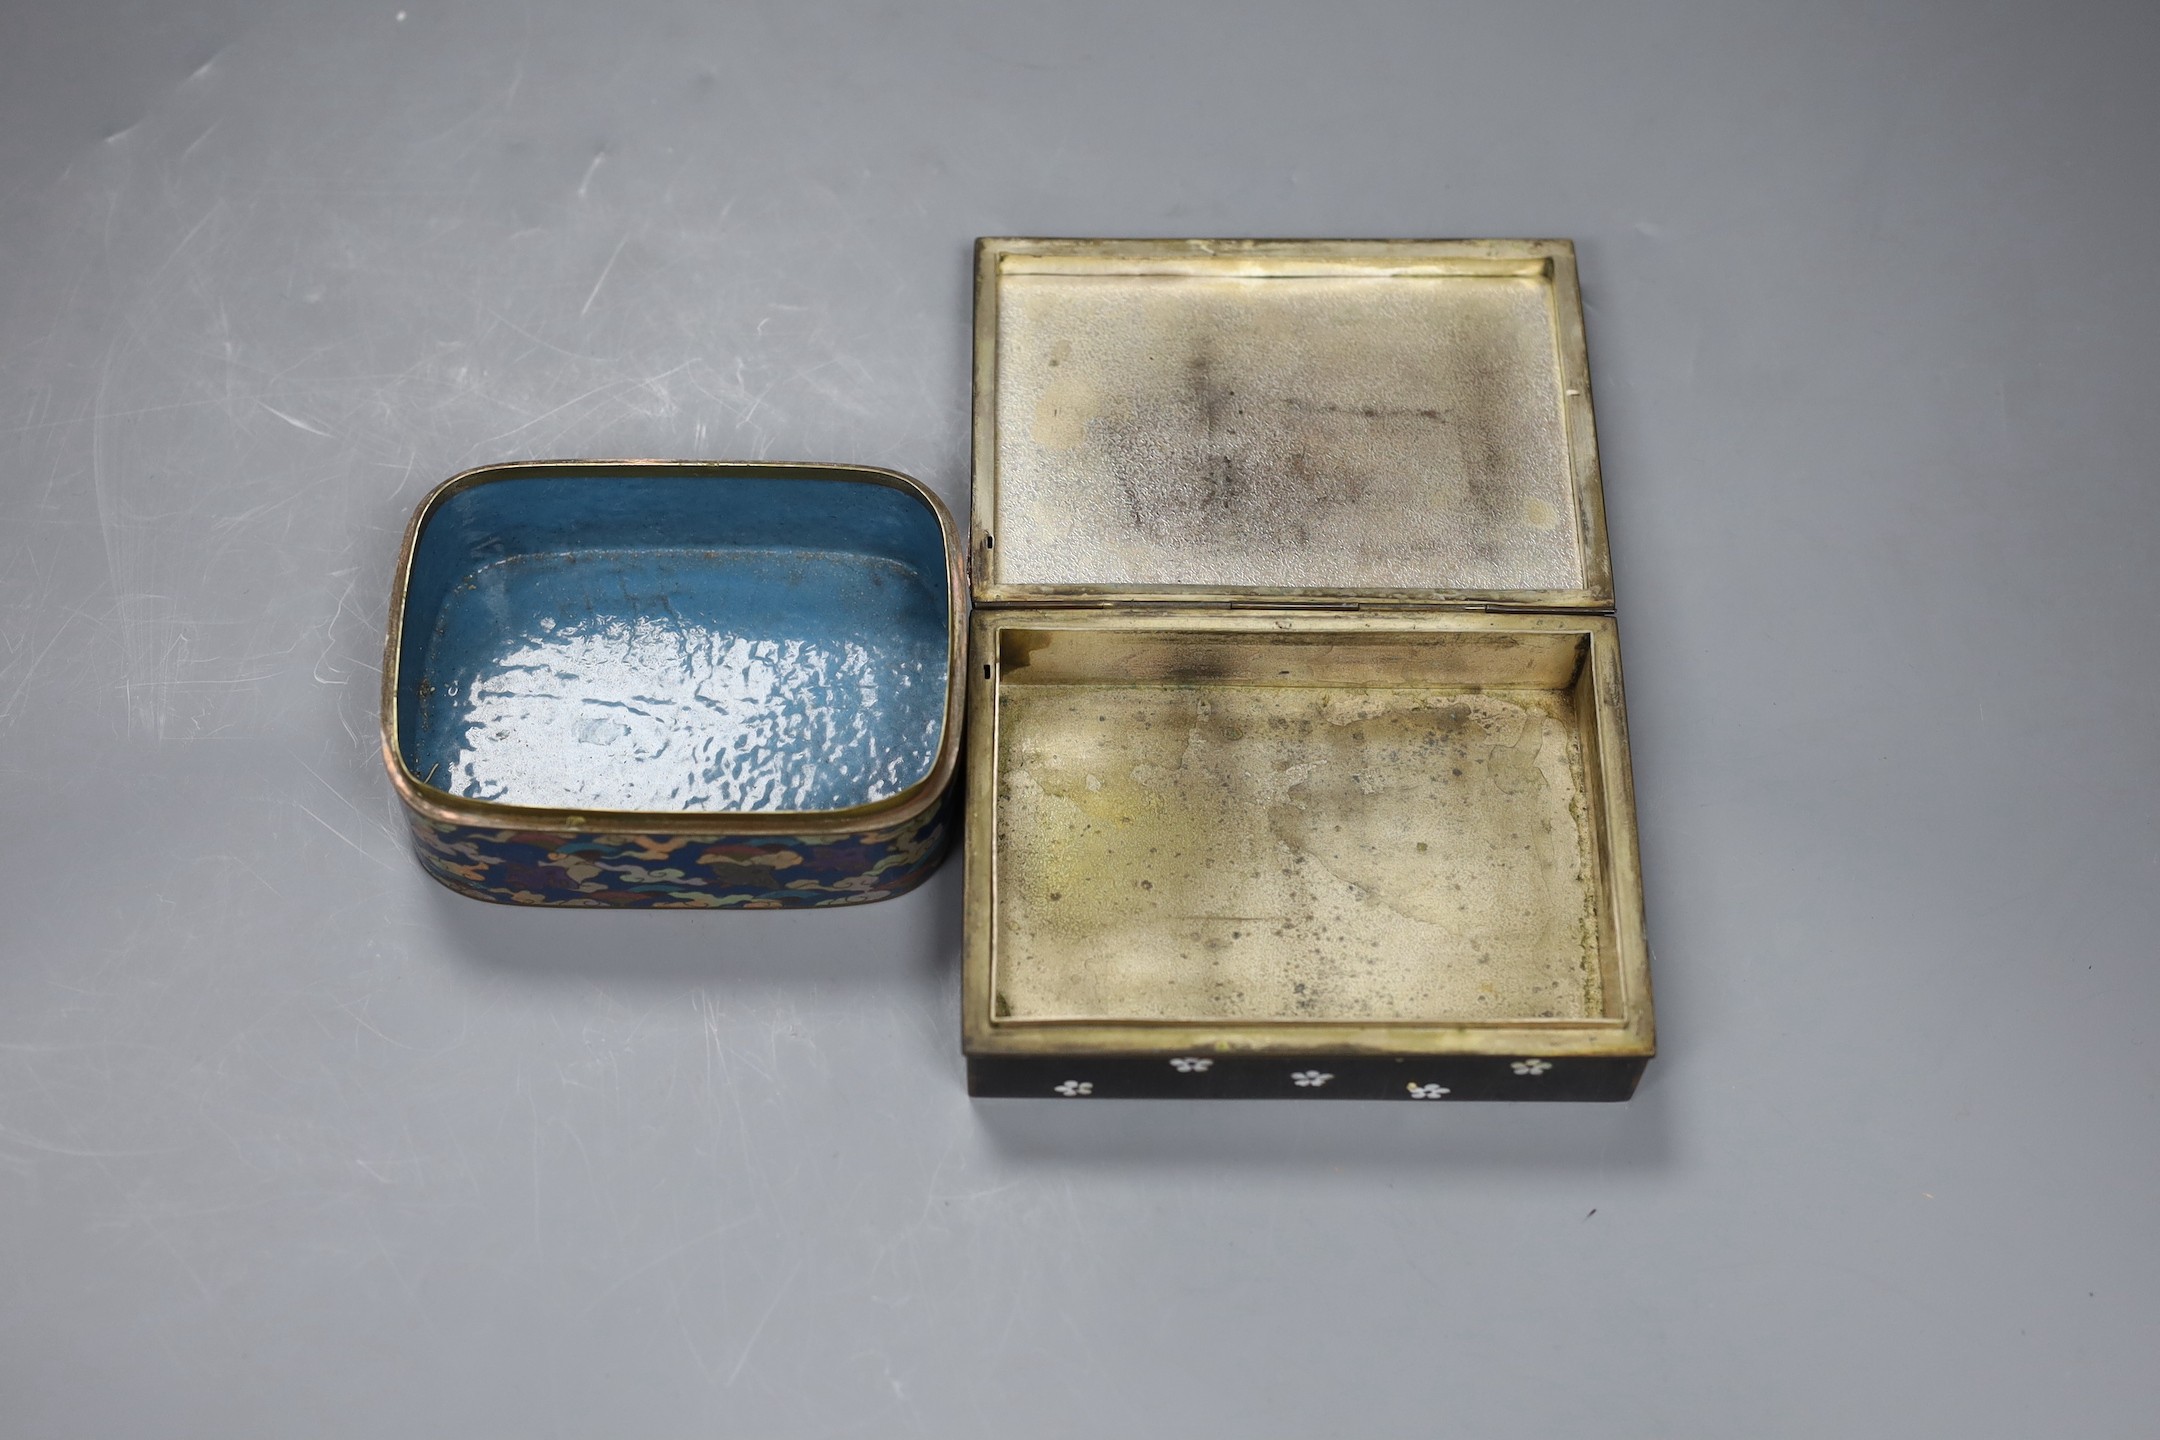 A Japanese silver wire cloisonné enamel box and cover, Meiji period and an early 20th century Japanese cloisonné enamel cigarette box, 13.5cms wide x 10cms deep